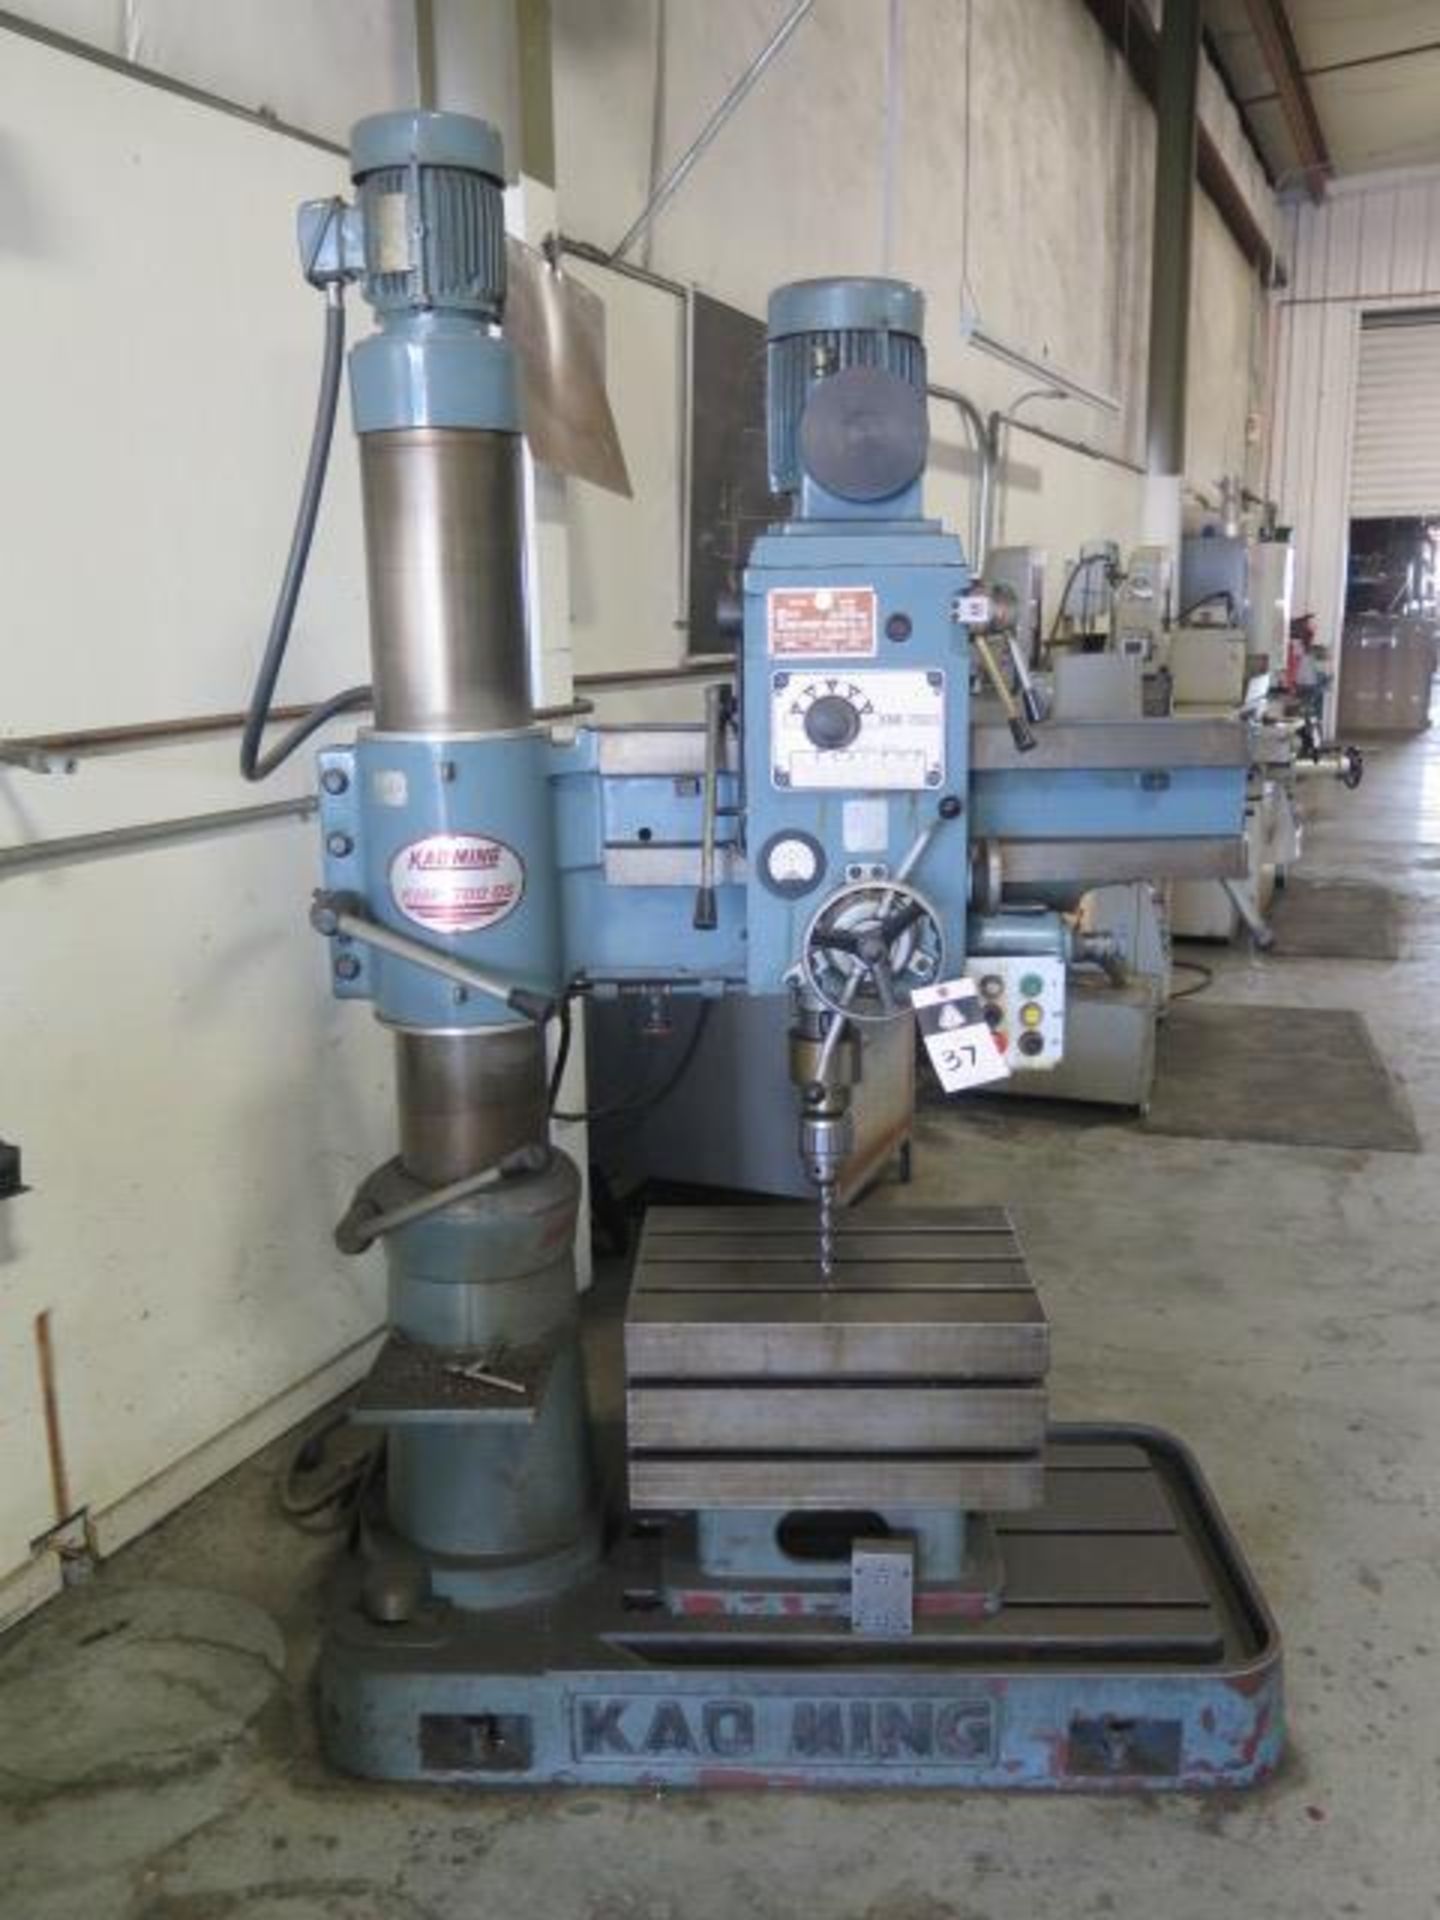 YCI Supermax KMR-700DS 8" Column x 22" Radial Arm Drill s/n 15495 w/ 88-1500 RPM, SOLD AS IS